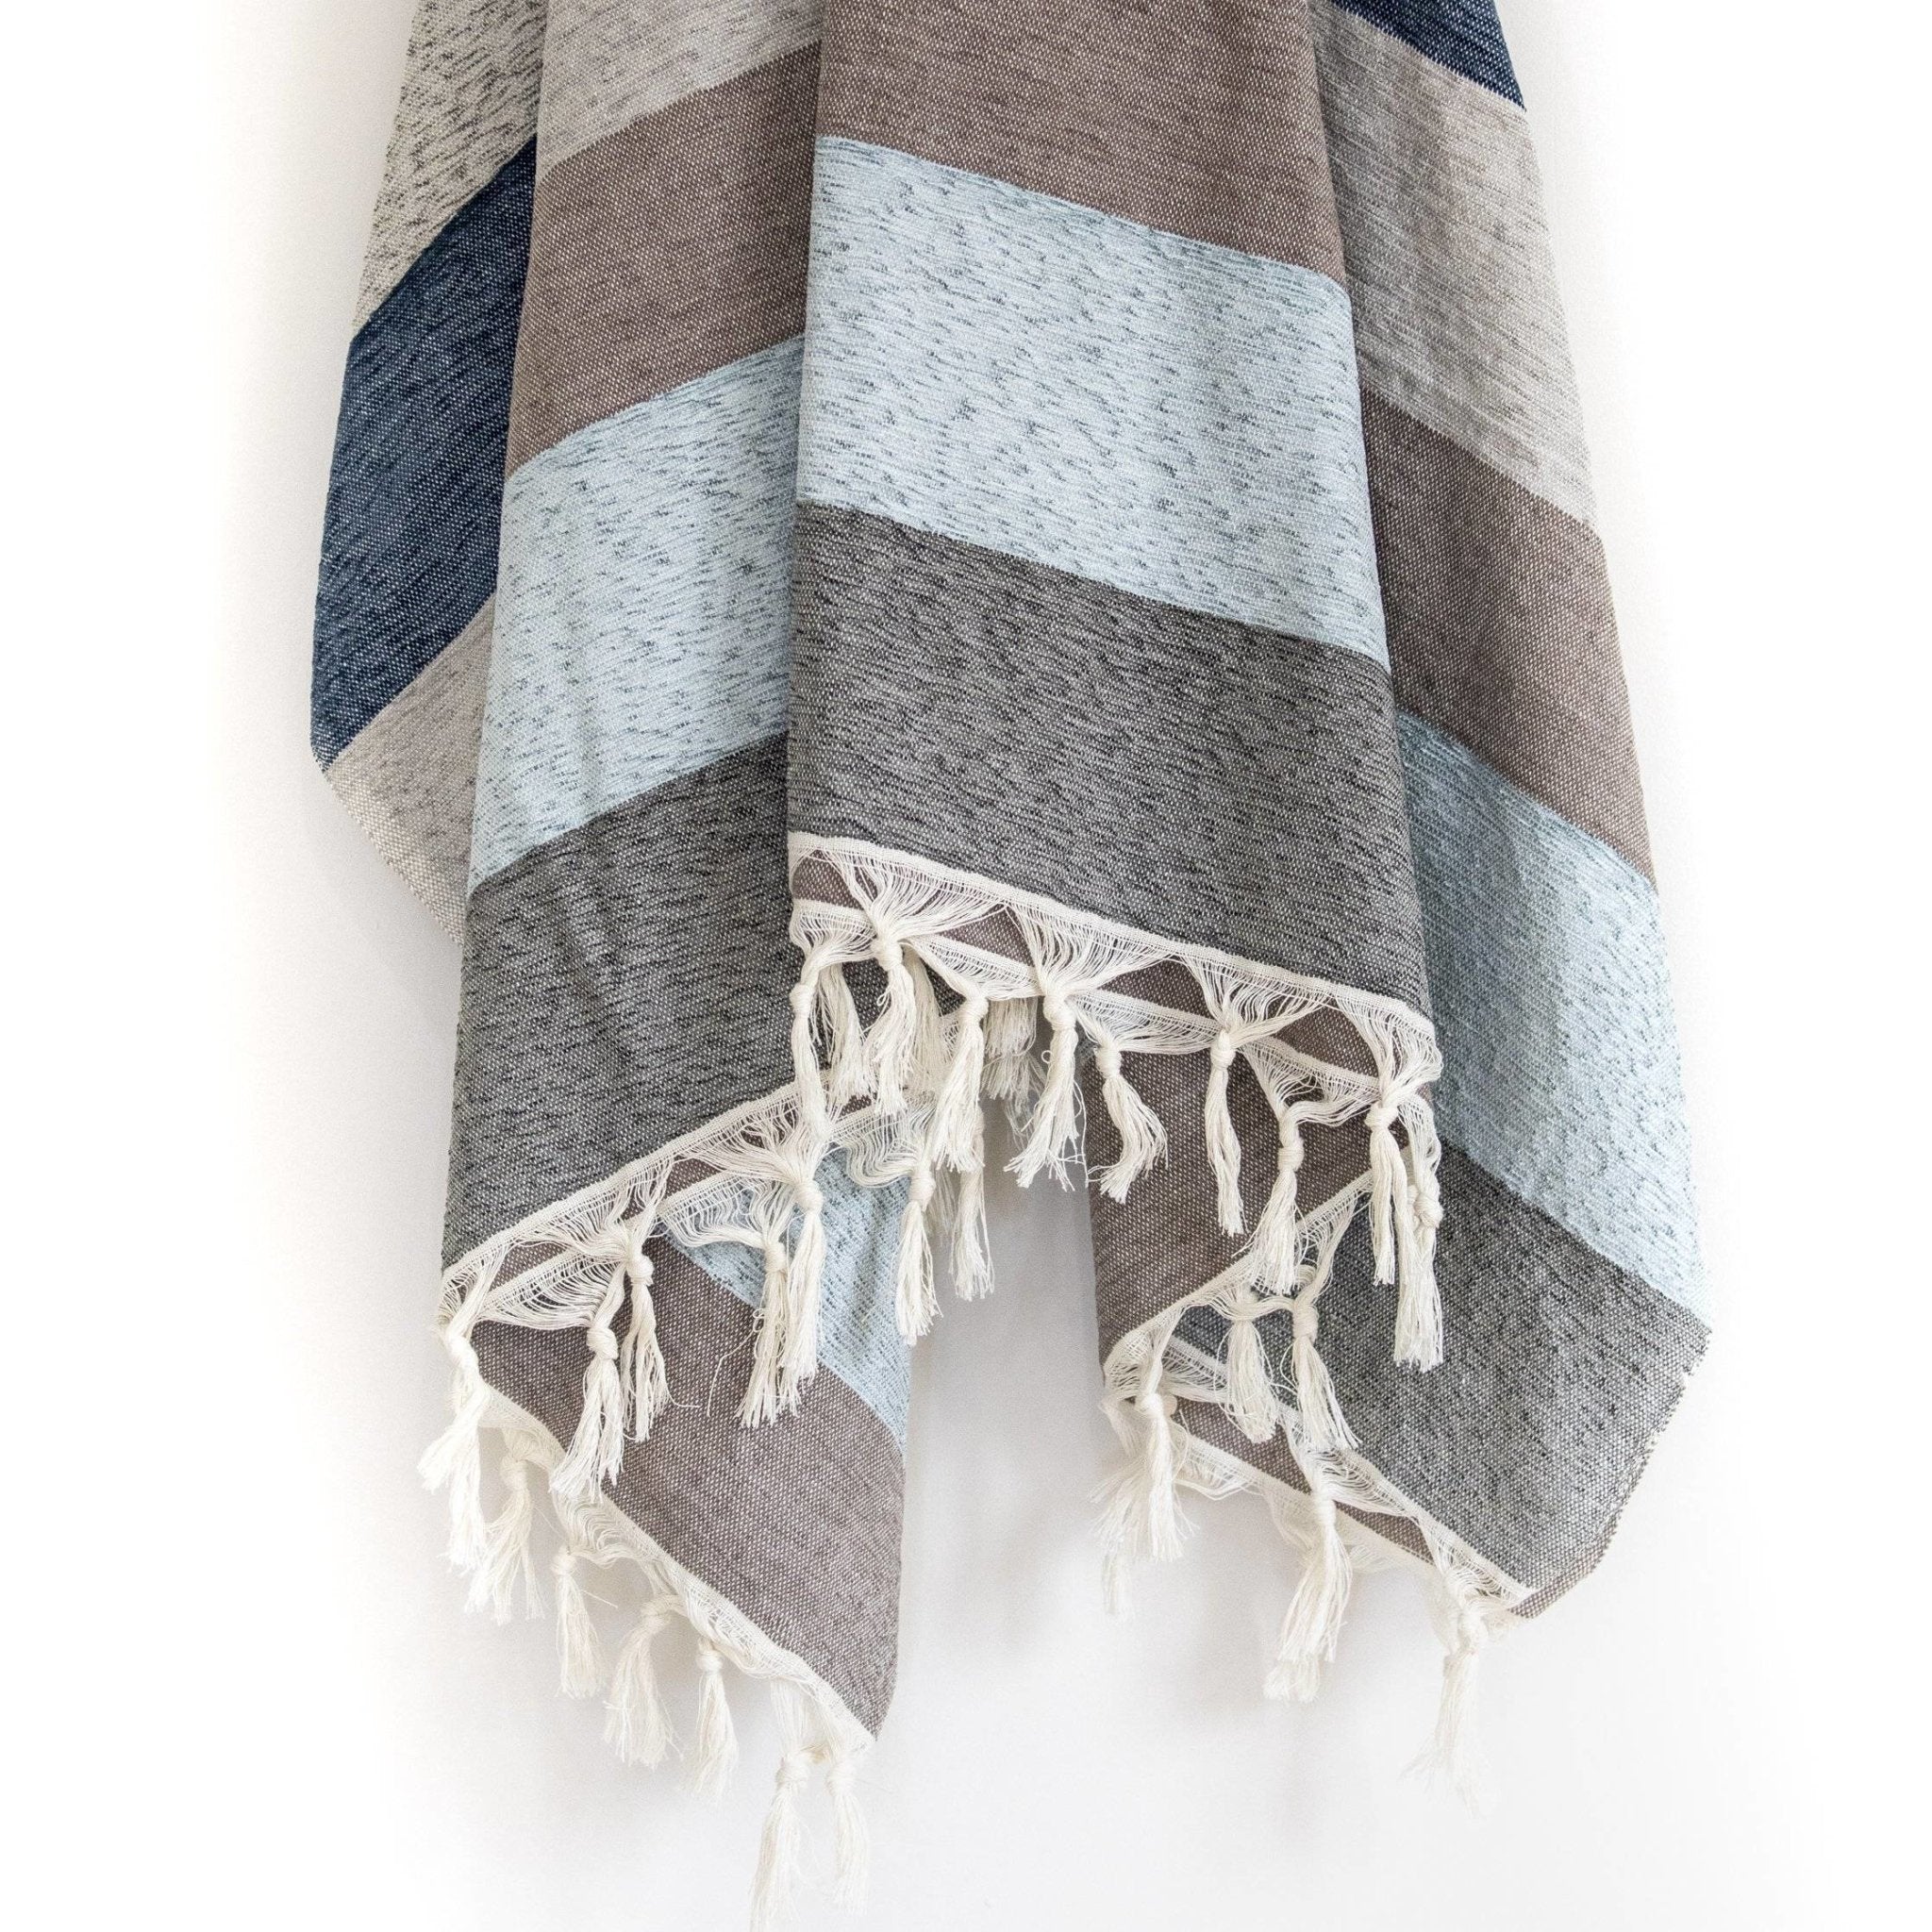 Hand-Woven Blanket - Stormy Seas - Near East Imports